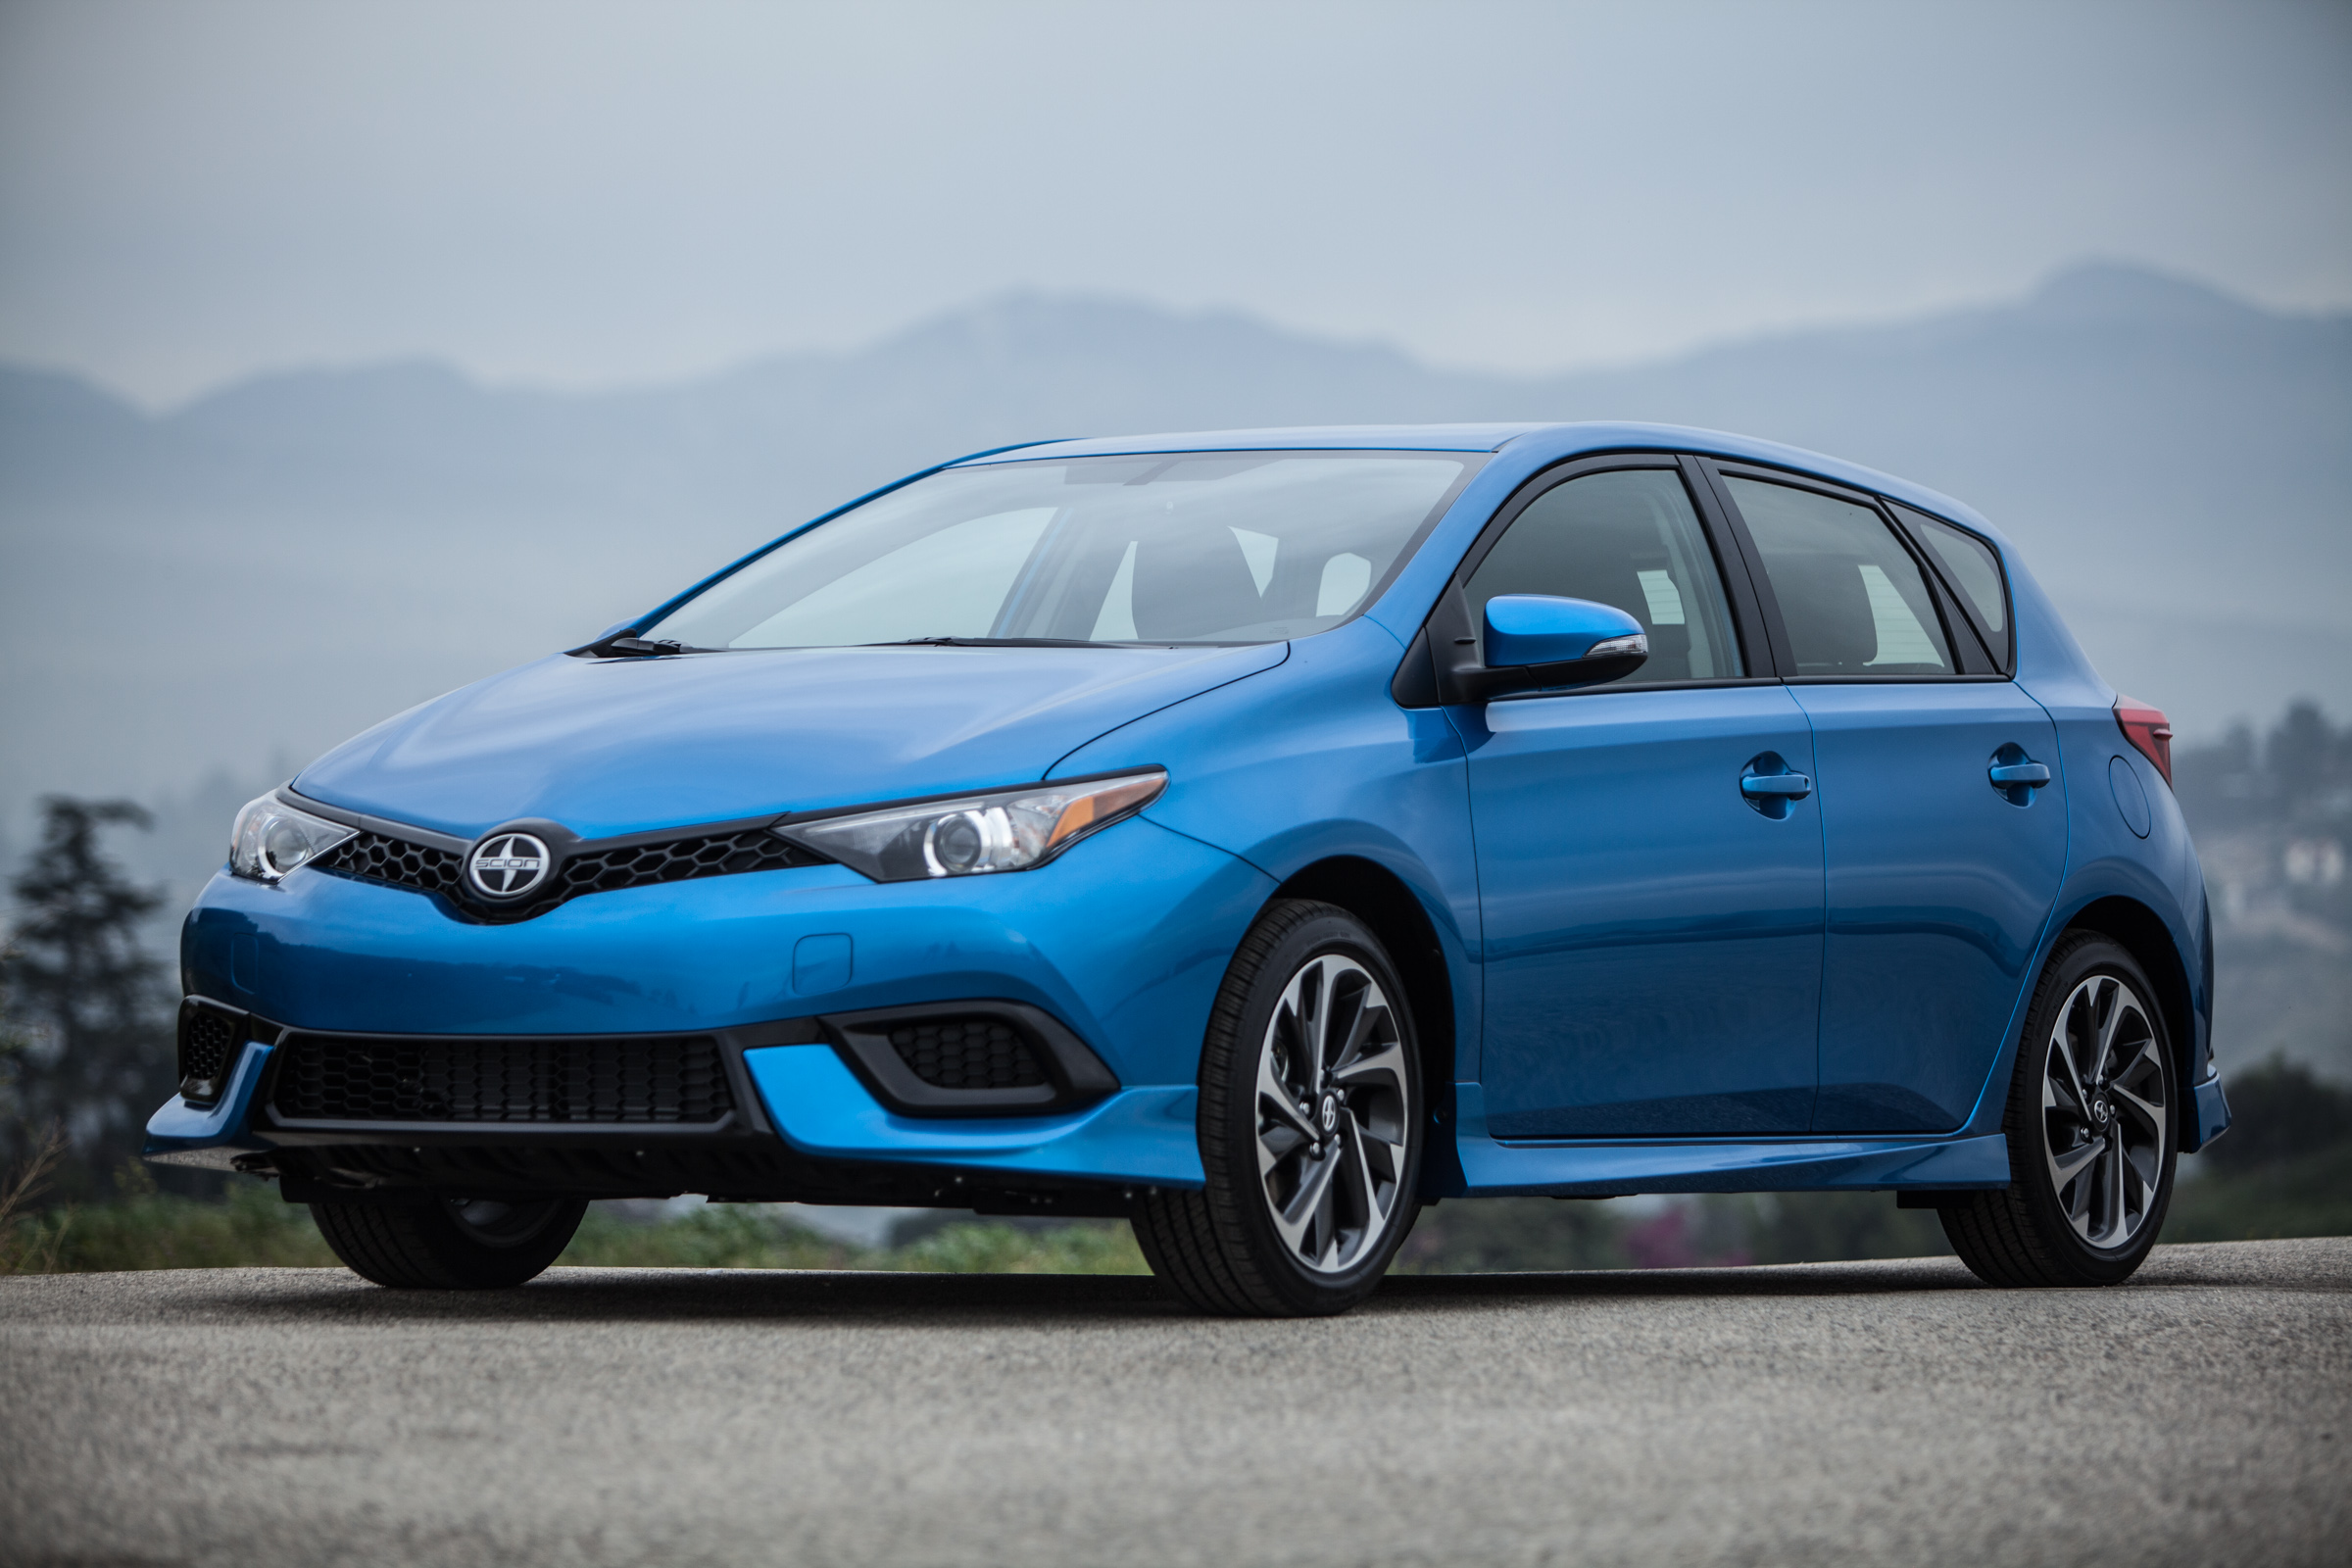 Scion unveils sporty new hatchback at New York Auto Show